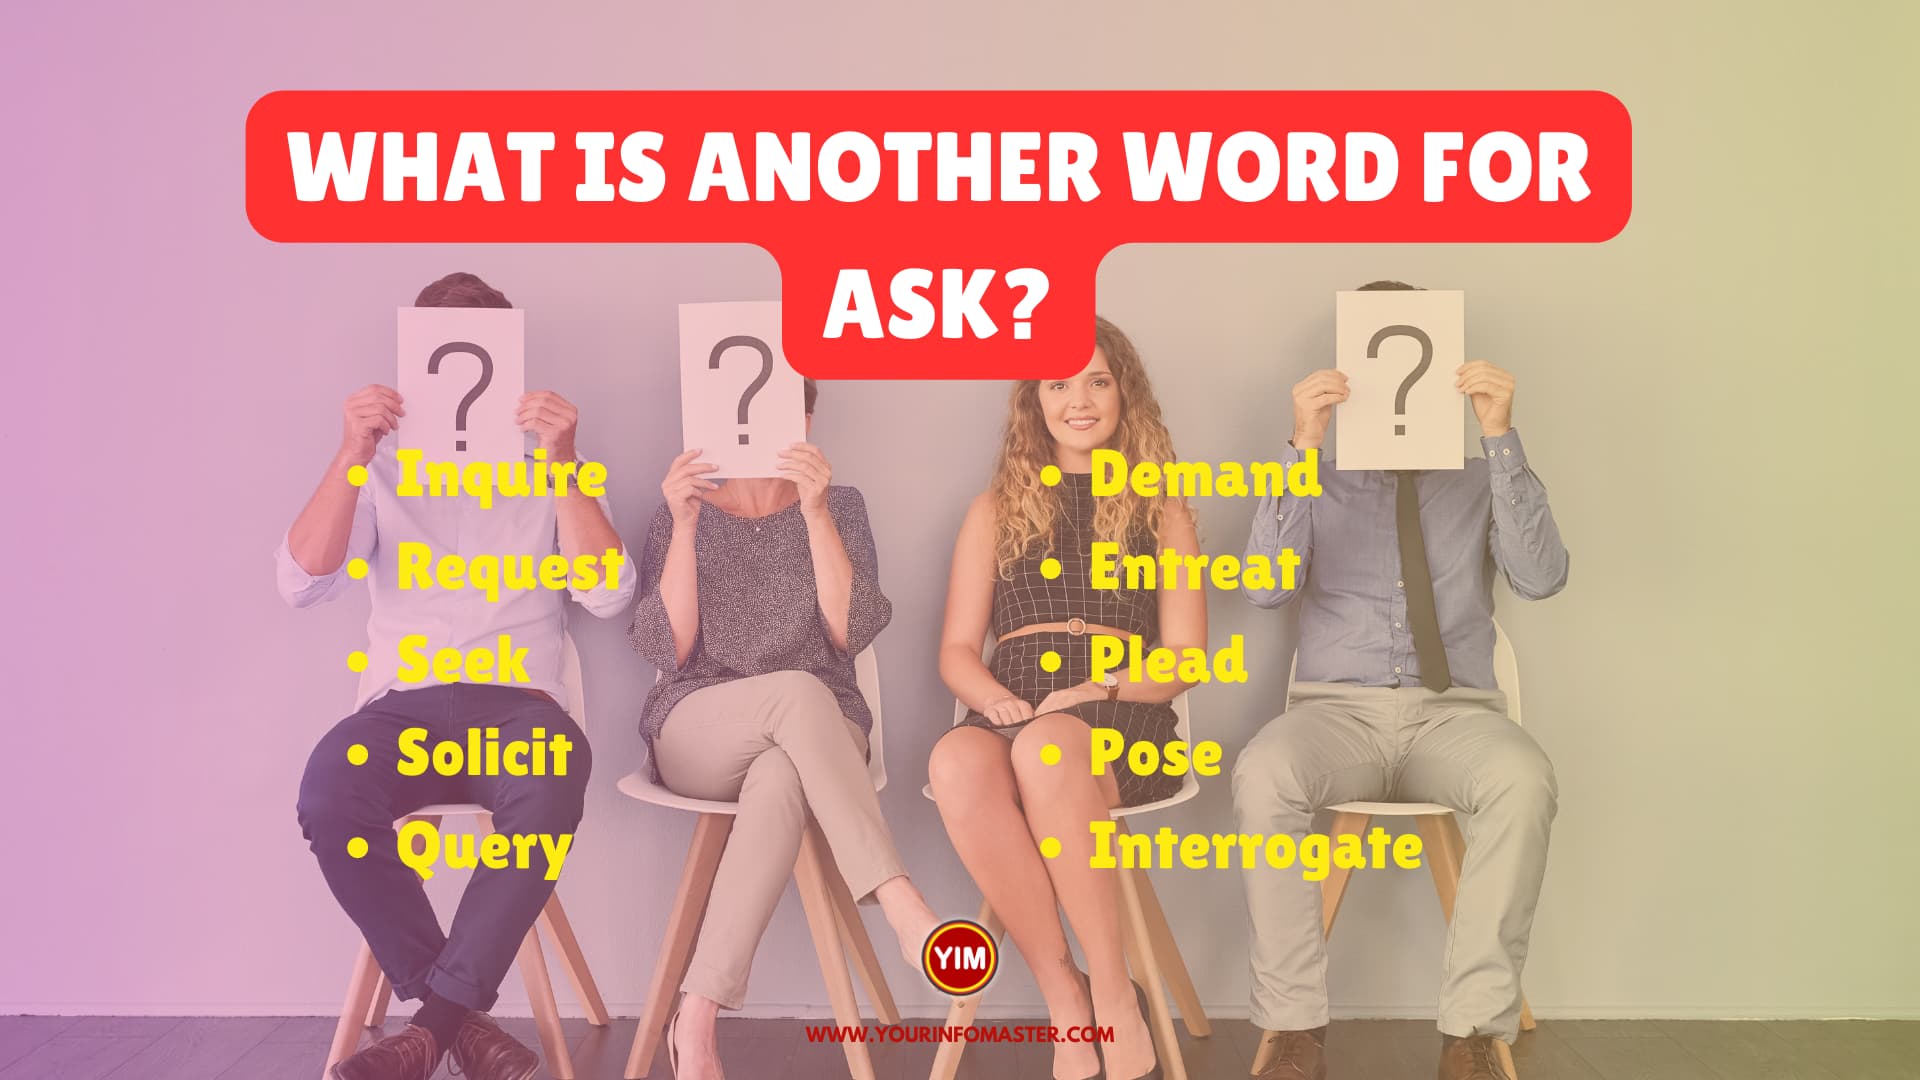 What is another word for Ask